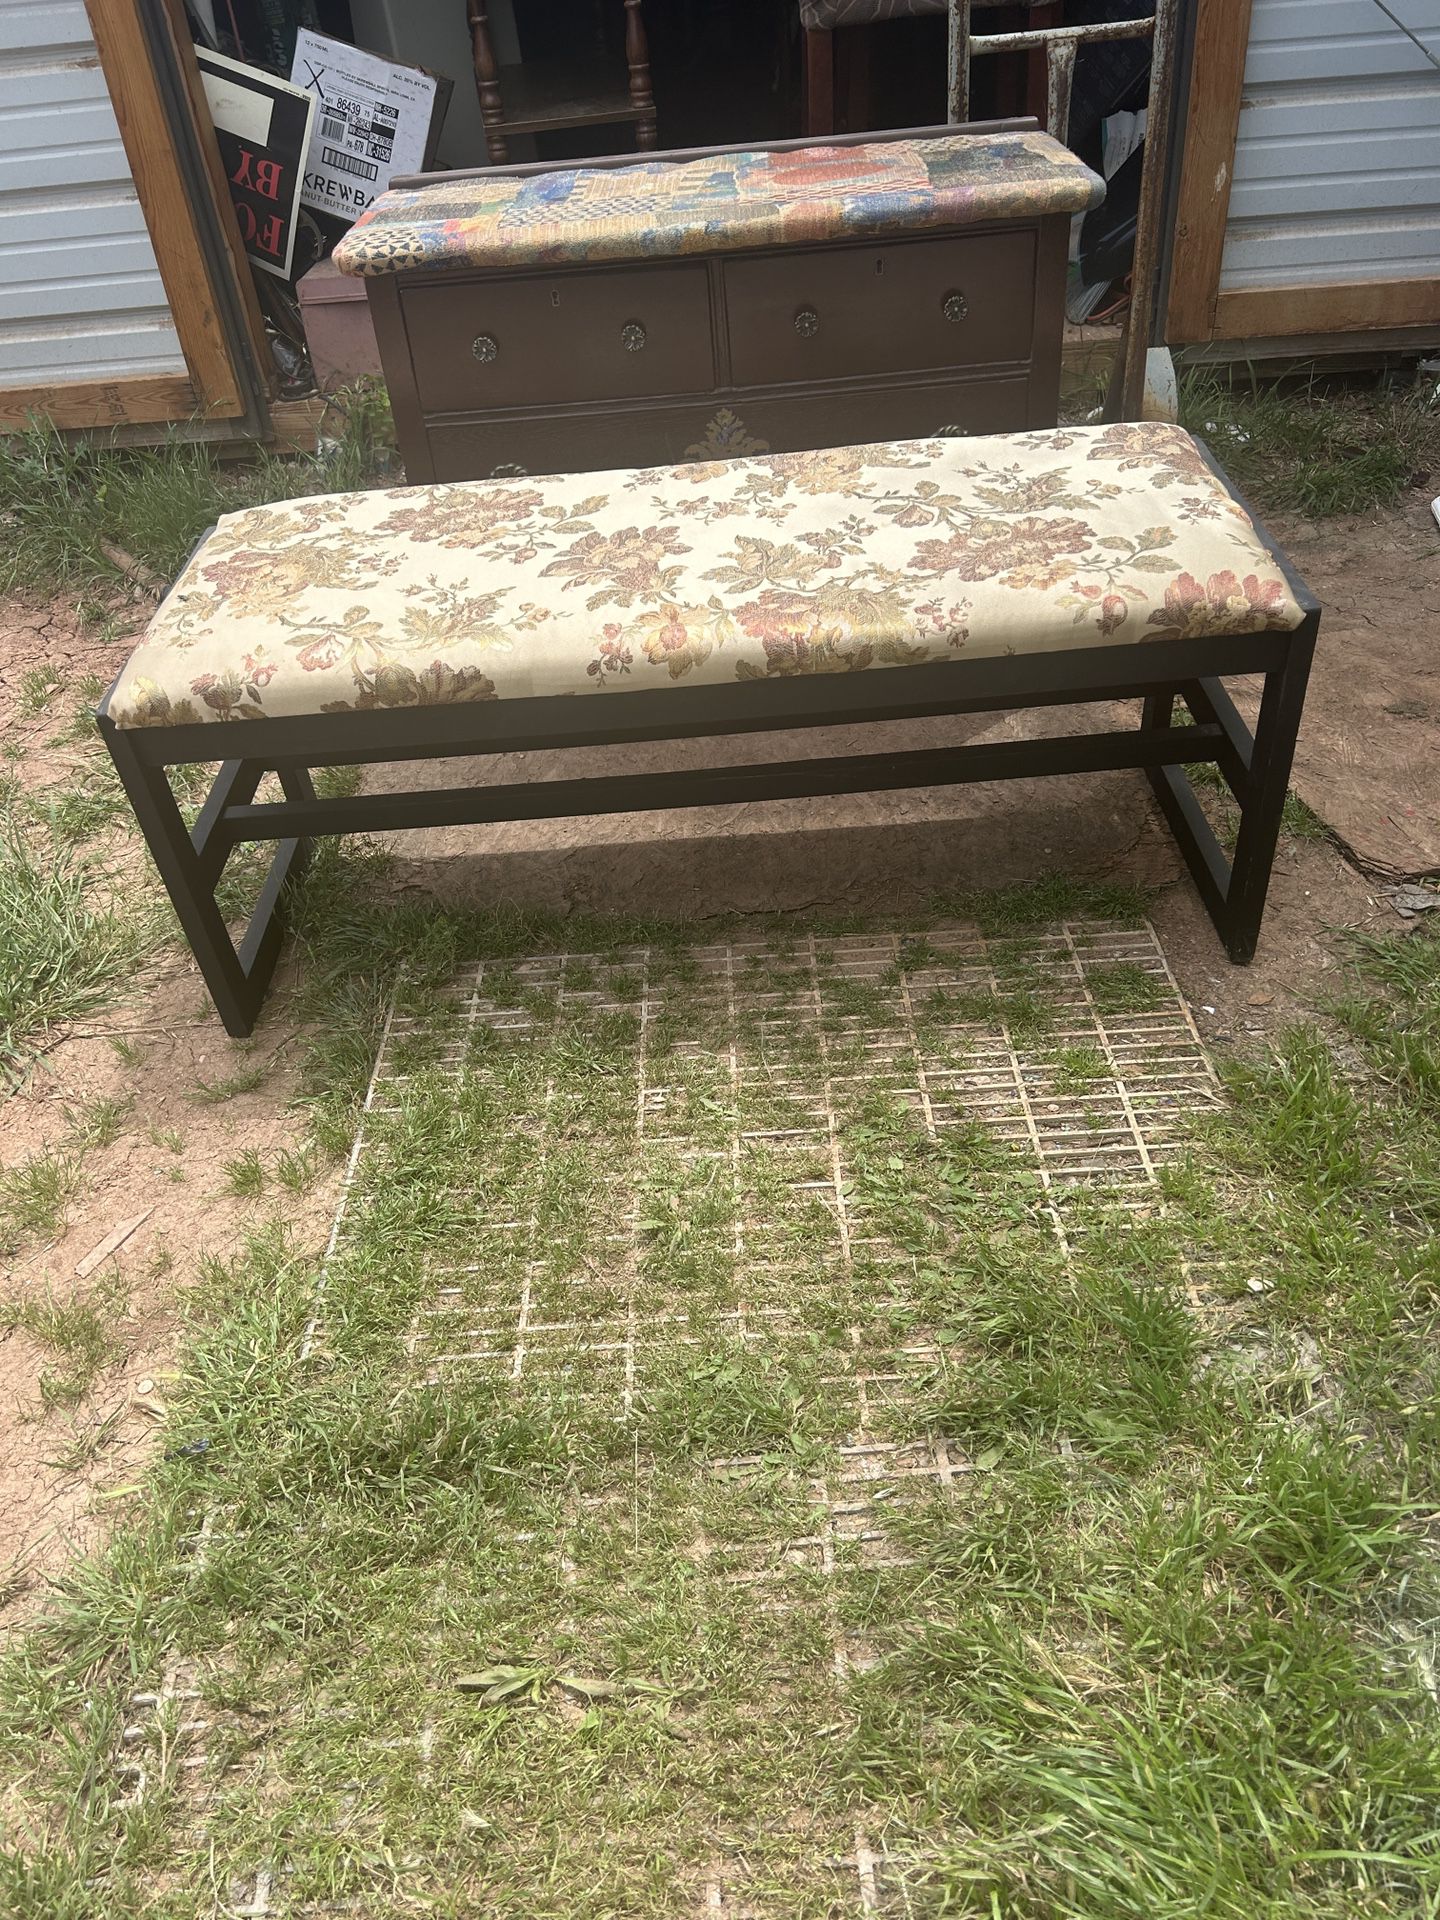 nice bench its 19 inches tall 48inches wide and 22 inches deep